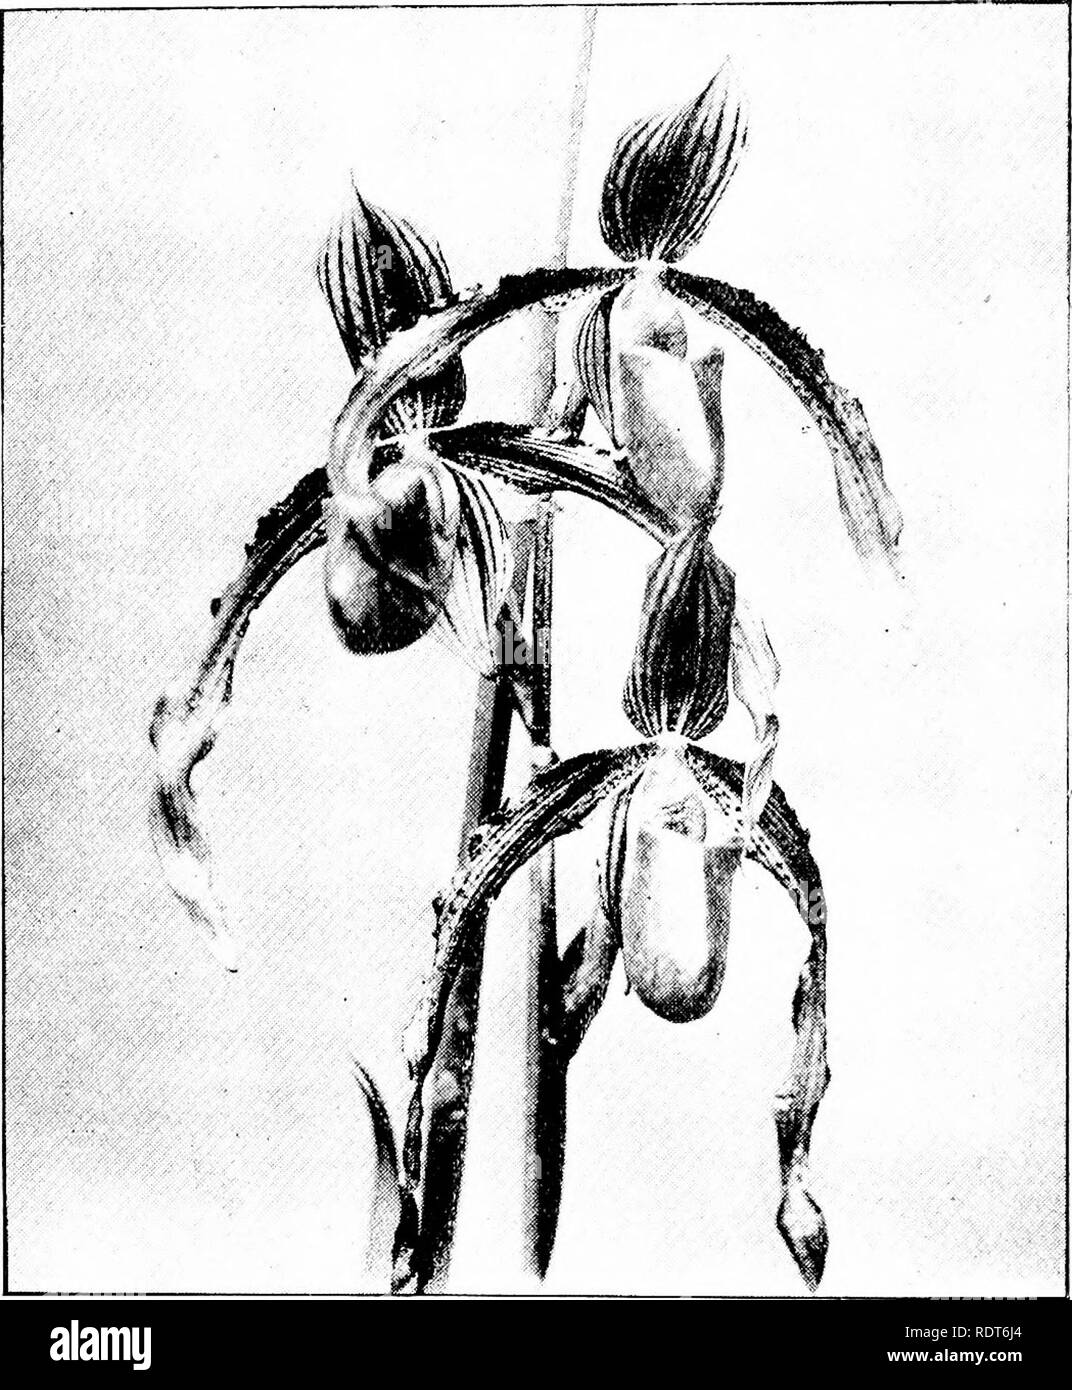 . The orchid stud-book: an enumeration of hybrid orchids of artificial origin, with their parents, raisers, date of first flowering, references to descriptions and figures, and synonymy. With an historical introduction and 120 figures and a chapter on hybridising and raising orchids from seed. Orchids. 164 THE ORCHID STUD-BOOK Part II. 268. P. X Harrisander (x Harrisianum 2 x Sanderianum).âWinn, 1896. C. X Harrisander, G.C. 1896, ii. 137 ; O.K. 1896, 228 ; 273, f. 14. [See Fig. 58. 269. P. X Harrisianum (barbatum x villosum 2 ), Stein O. 469.âVeitch, 1869. C. X Harrisianum, G.C. 1869, 108; Fl Stock Photo